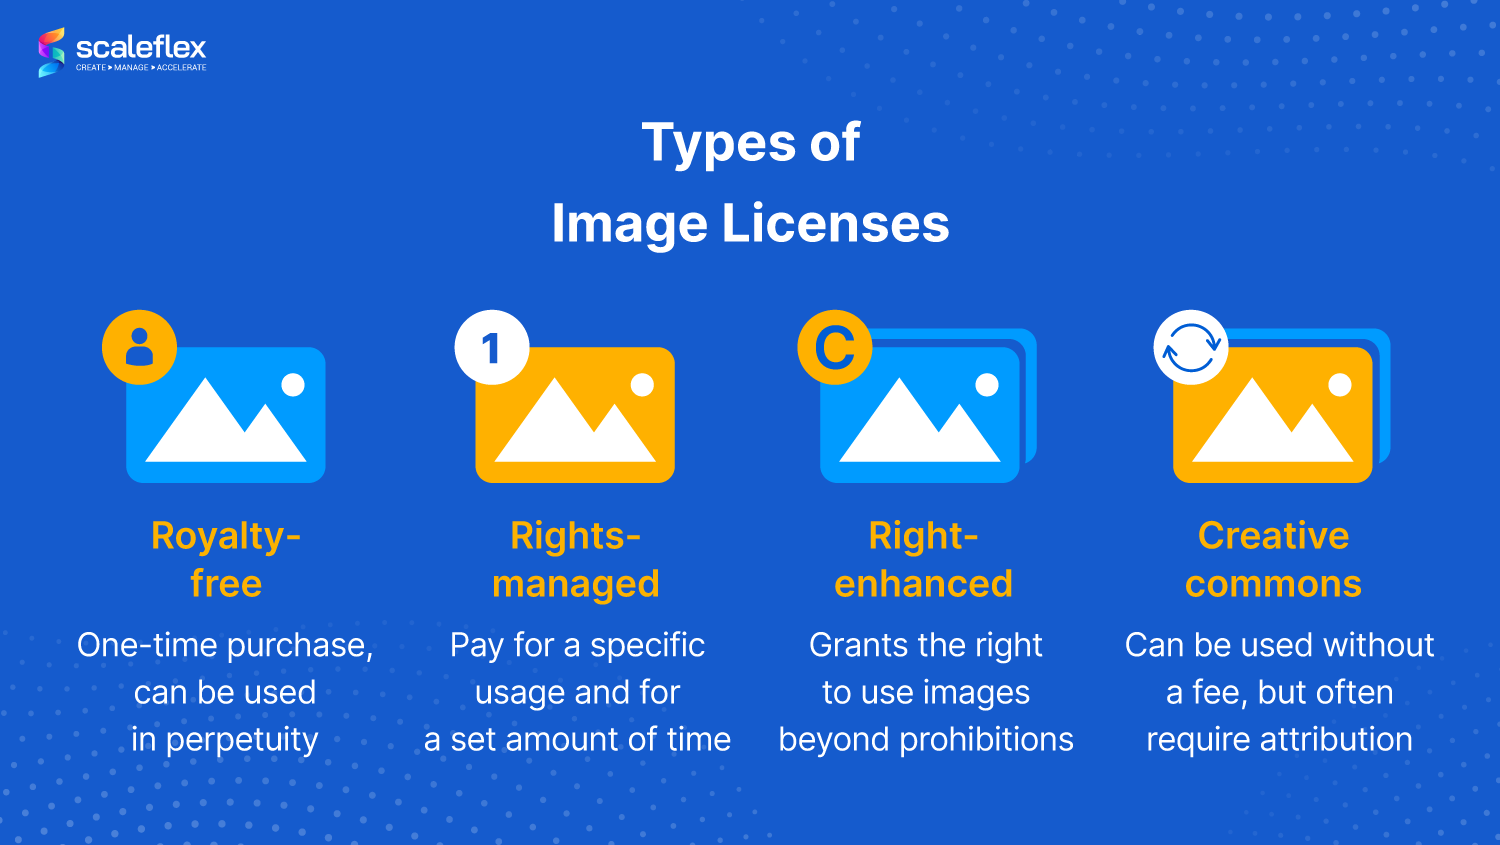 Different types of image licenses